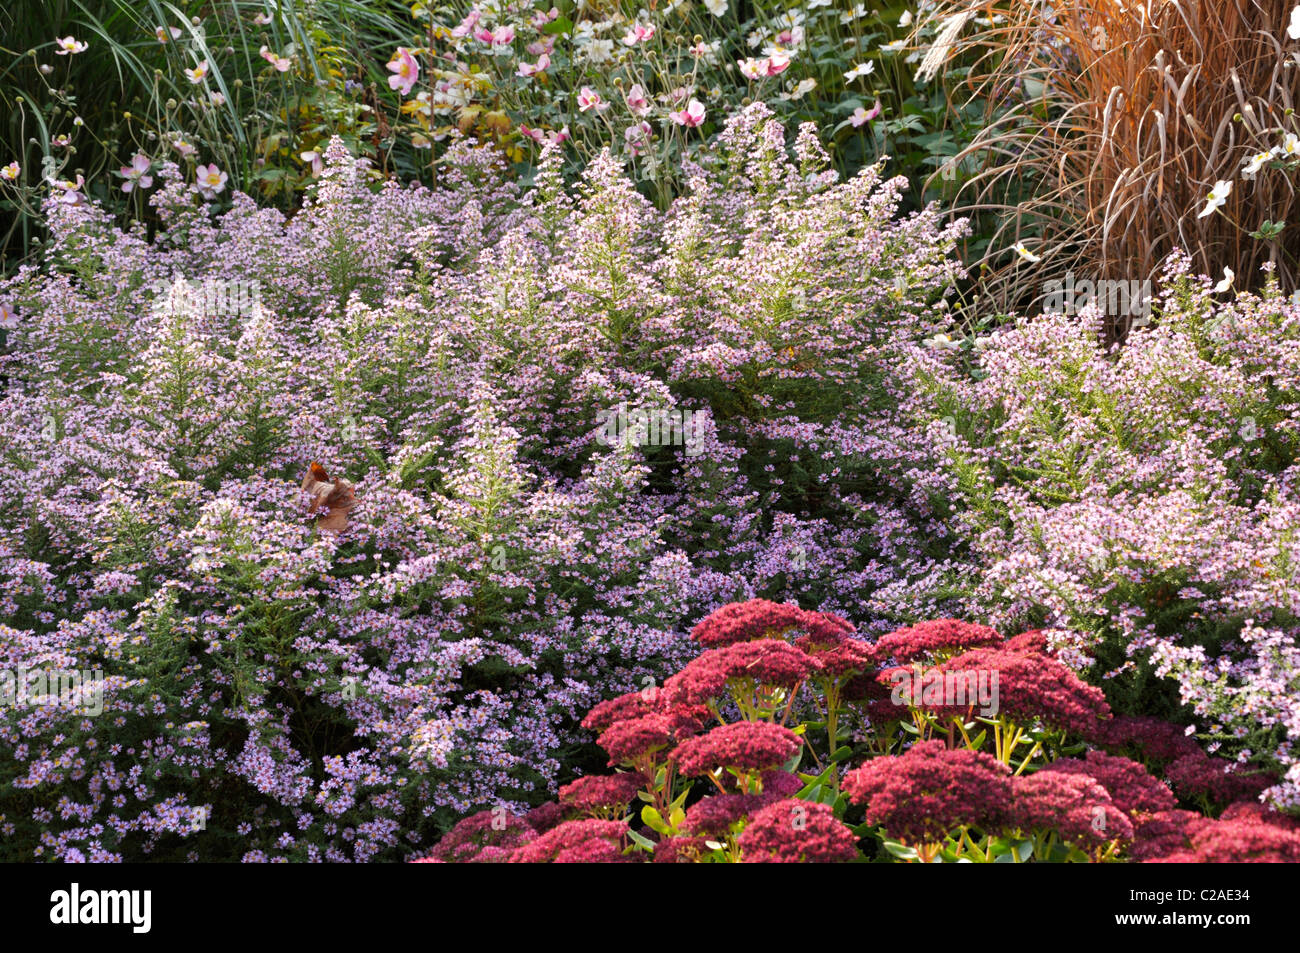 Heath aster (Aster ericoides 'Lovely' syn. Aster vimineus 'Lovely') and orpine (Sedum telephium 'Herbstfreude' syn. Hylotelephium telephium Stock Photo